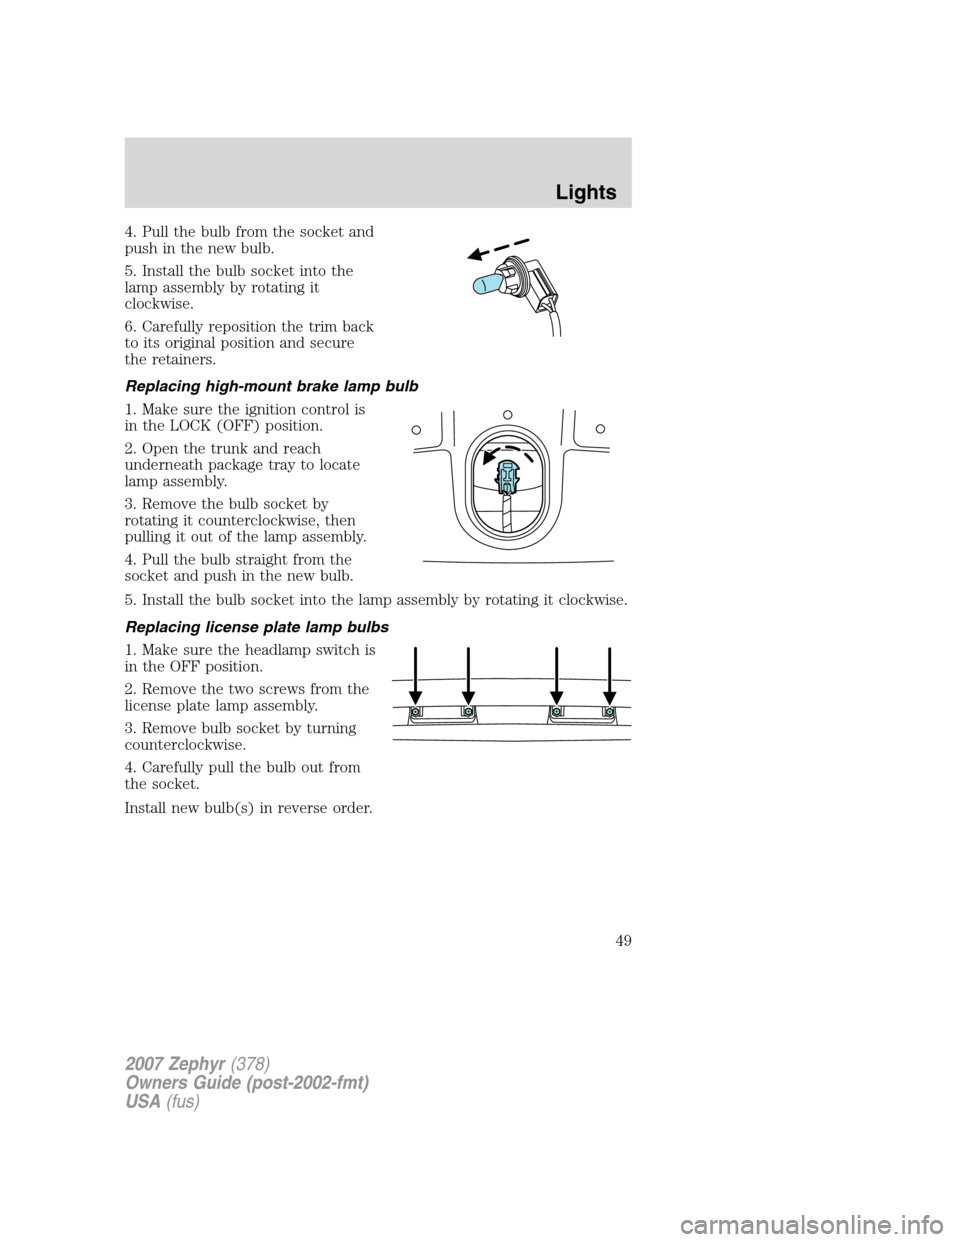 LINCOLN MKZ 2007 Service Manual 4. Pull the bulb from the socket and
push in the new bulb.
5. Install the bulb socket into the
lamp assembly by rotating it
clockwise.
6. Carefully reposition the trim back
to its original position an